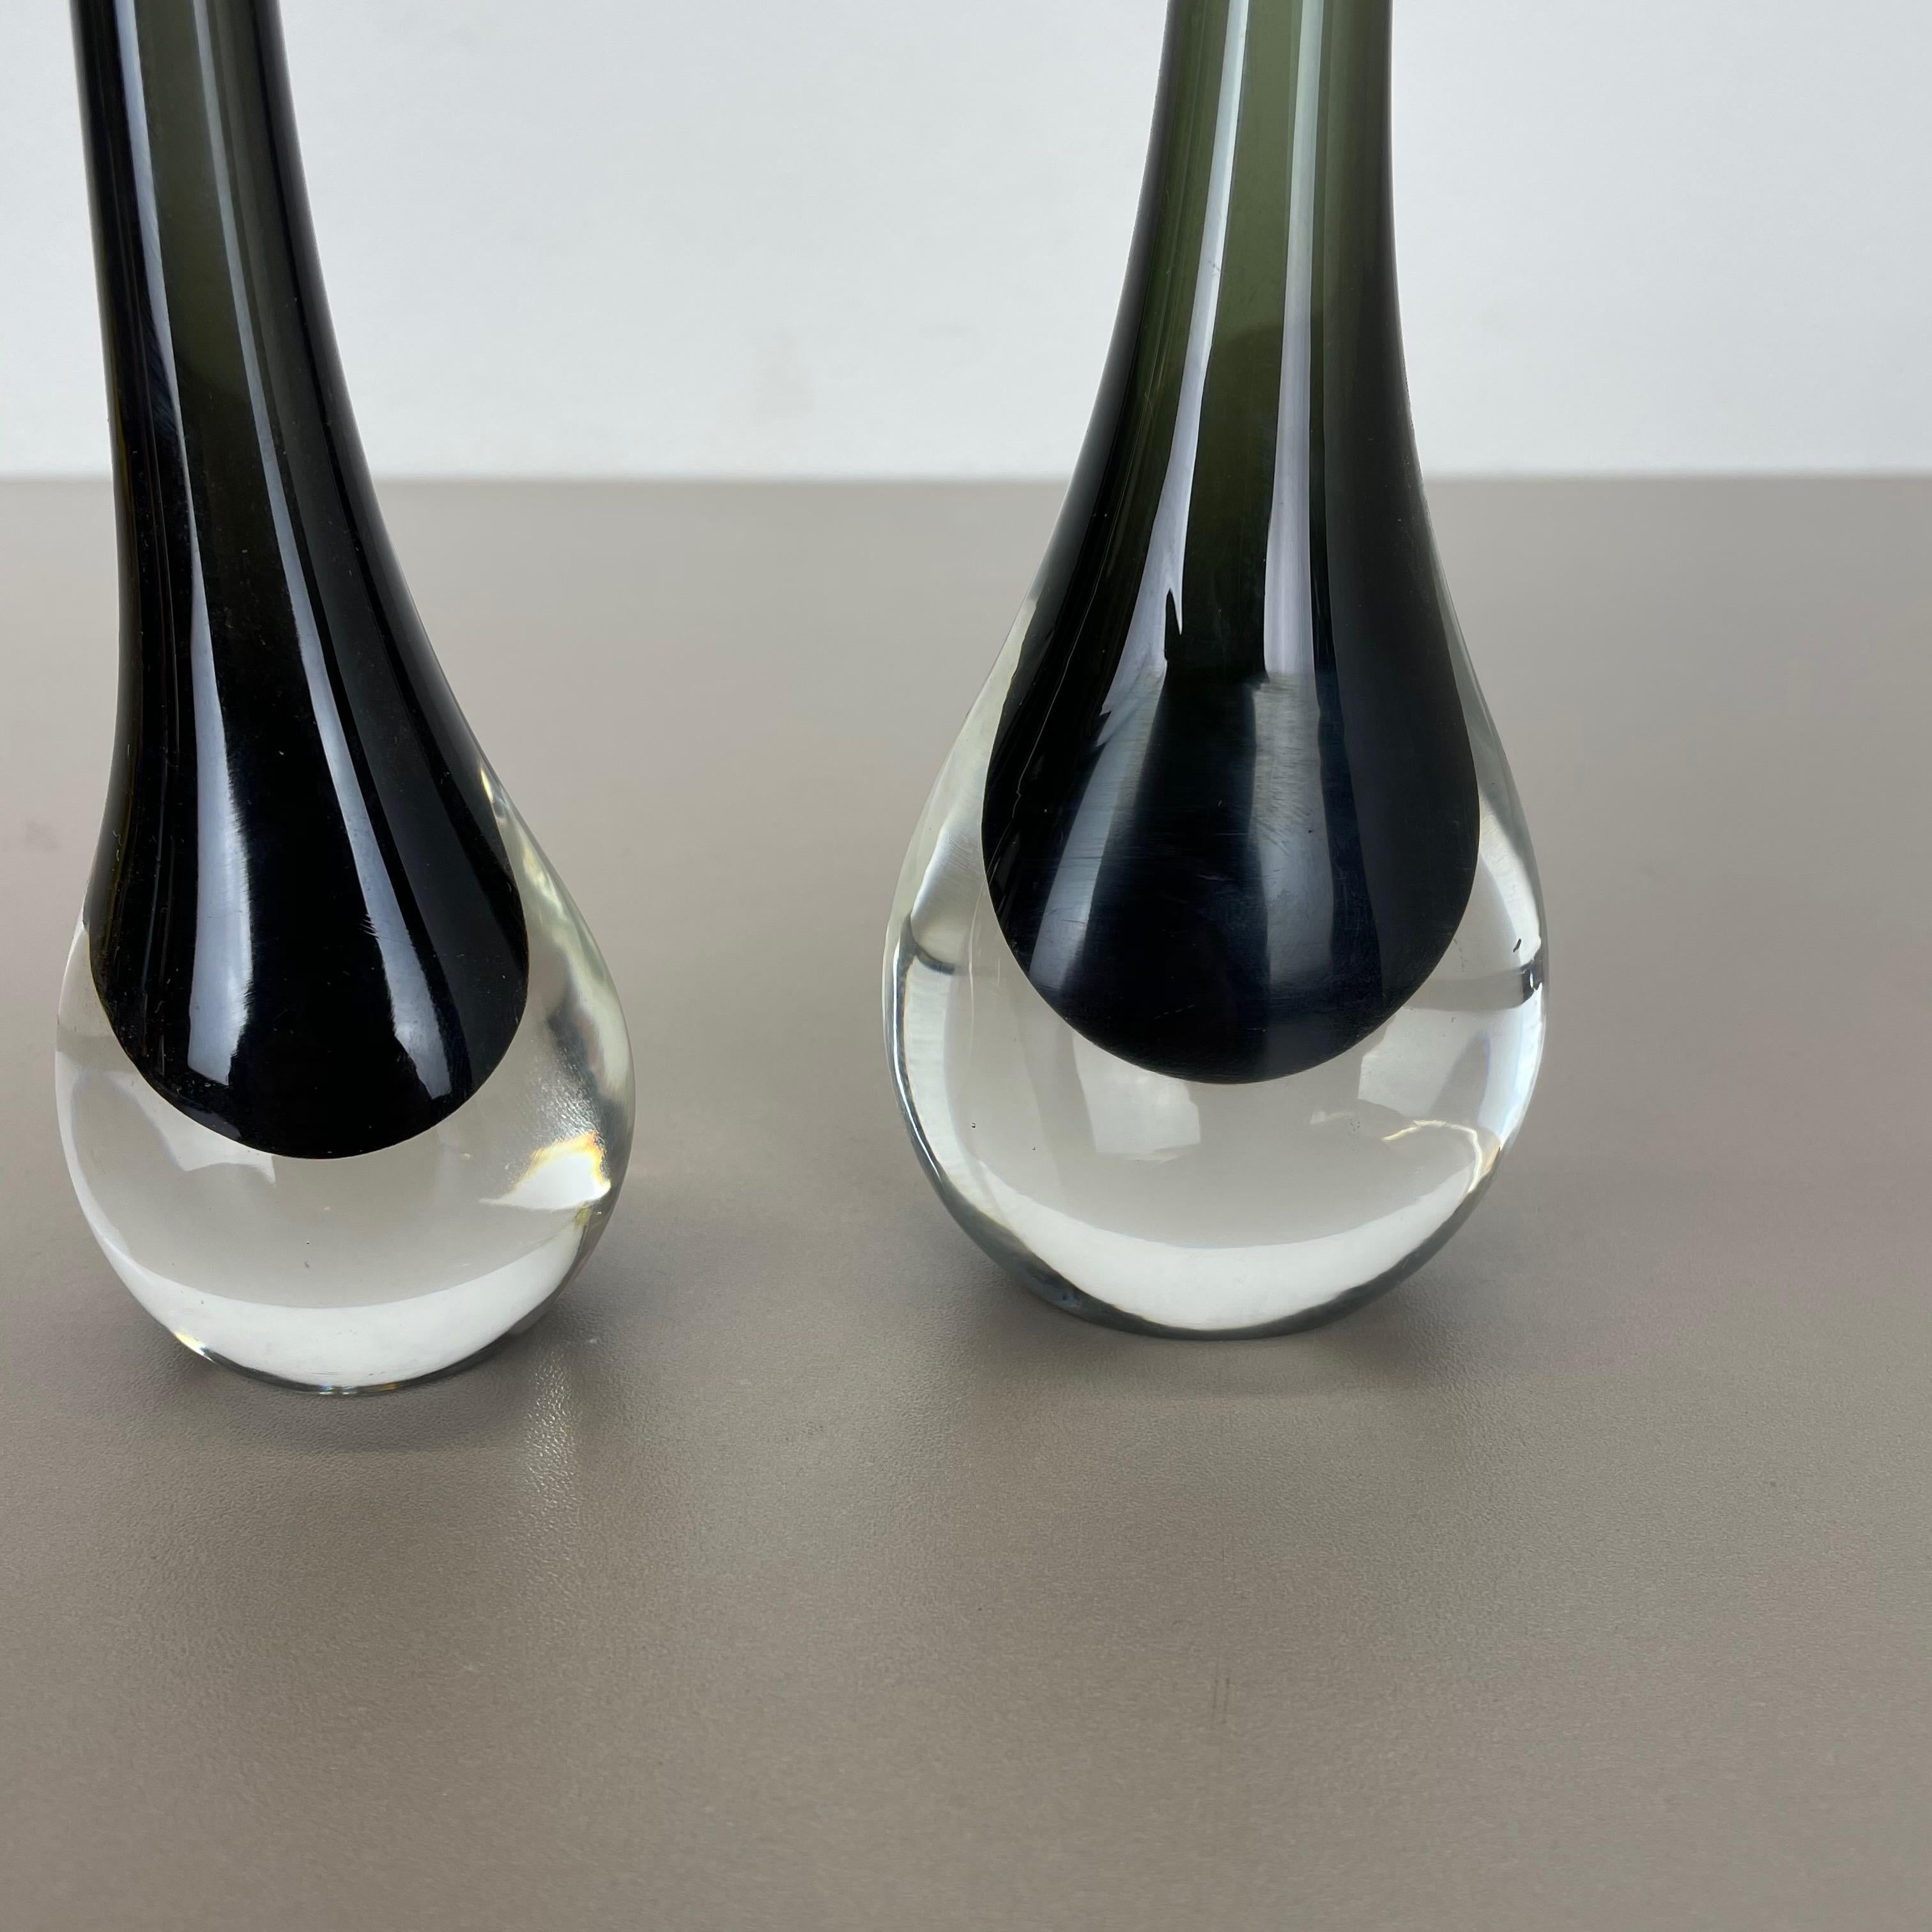 Set of 2 New Old Stock Murano Opaline Glass by Antonio da Ros, Cenedese, 1960s For Sale 3